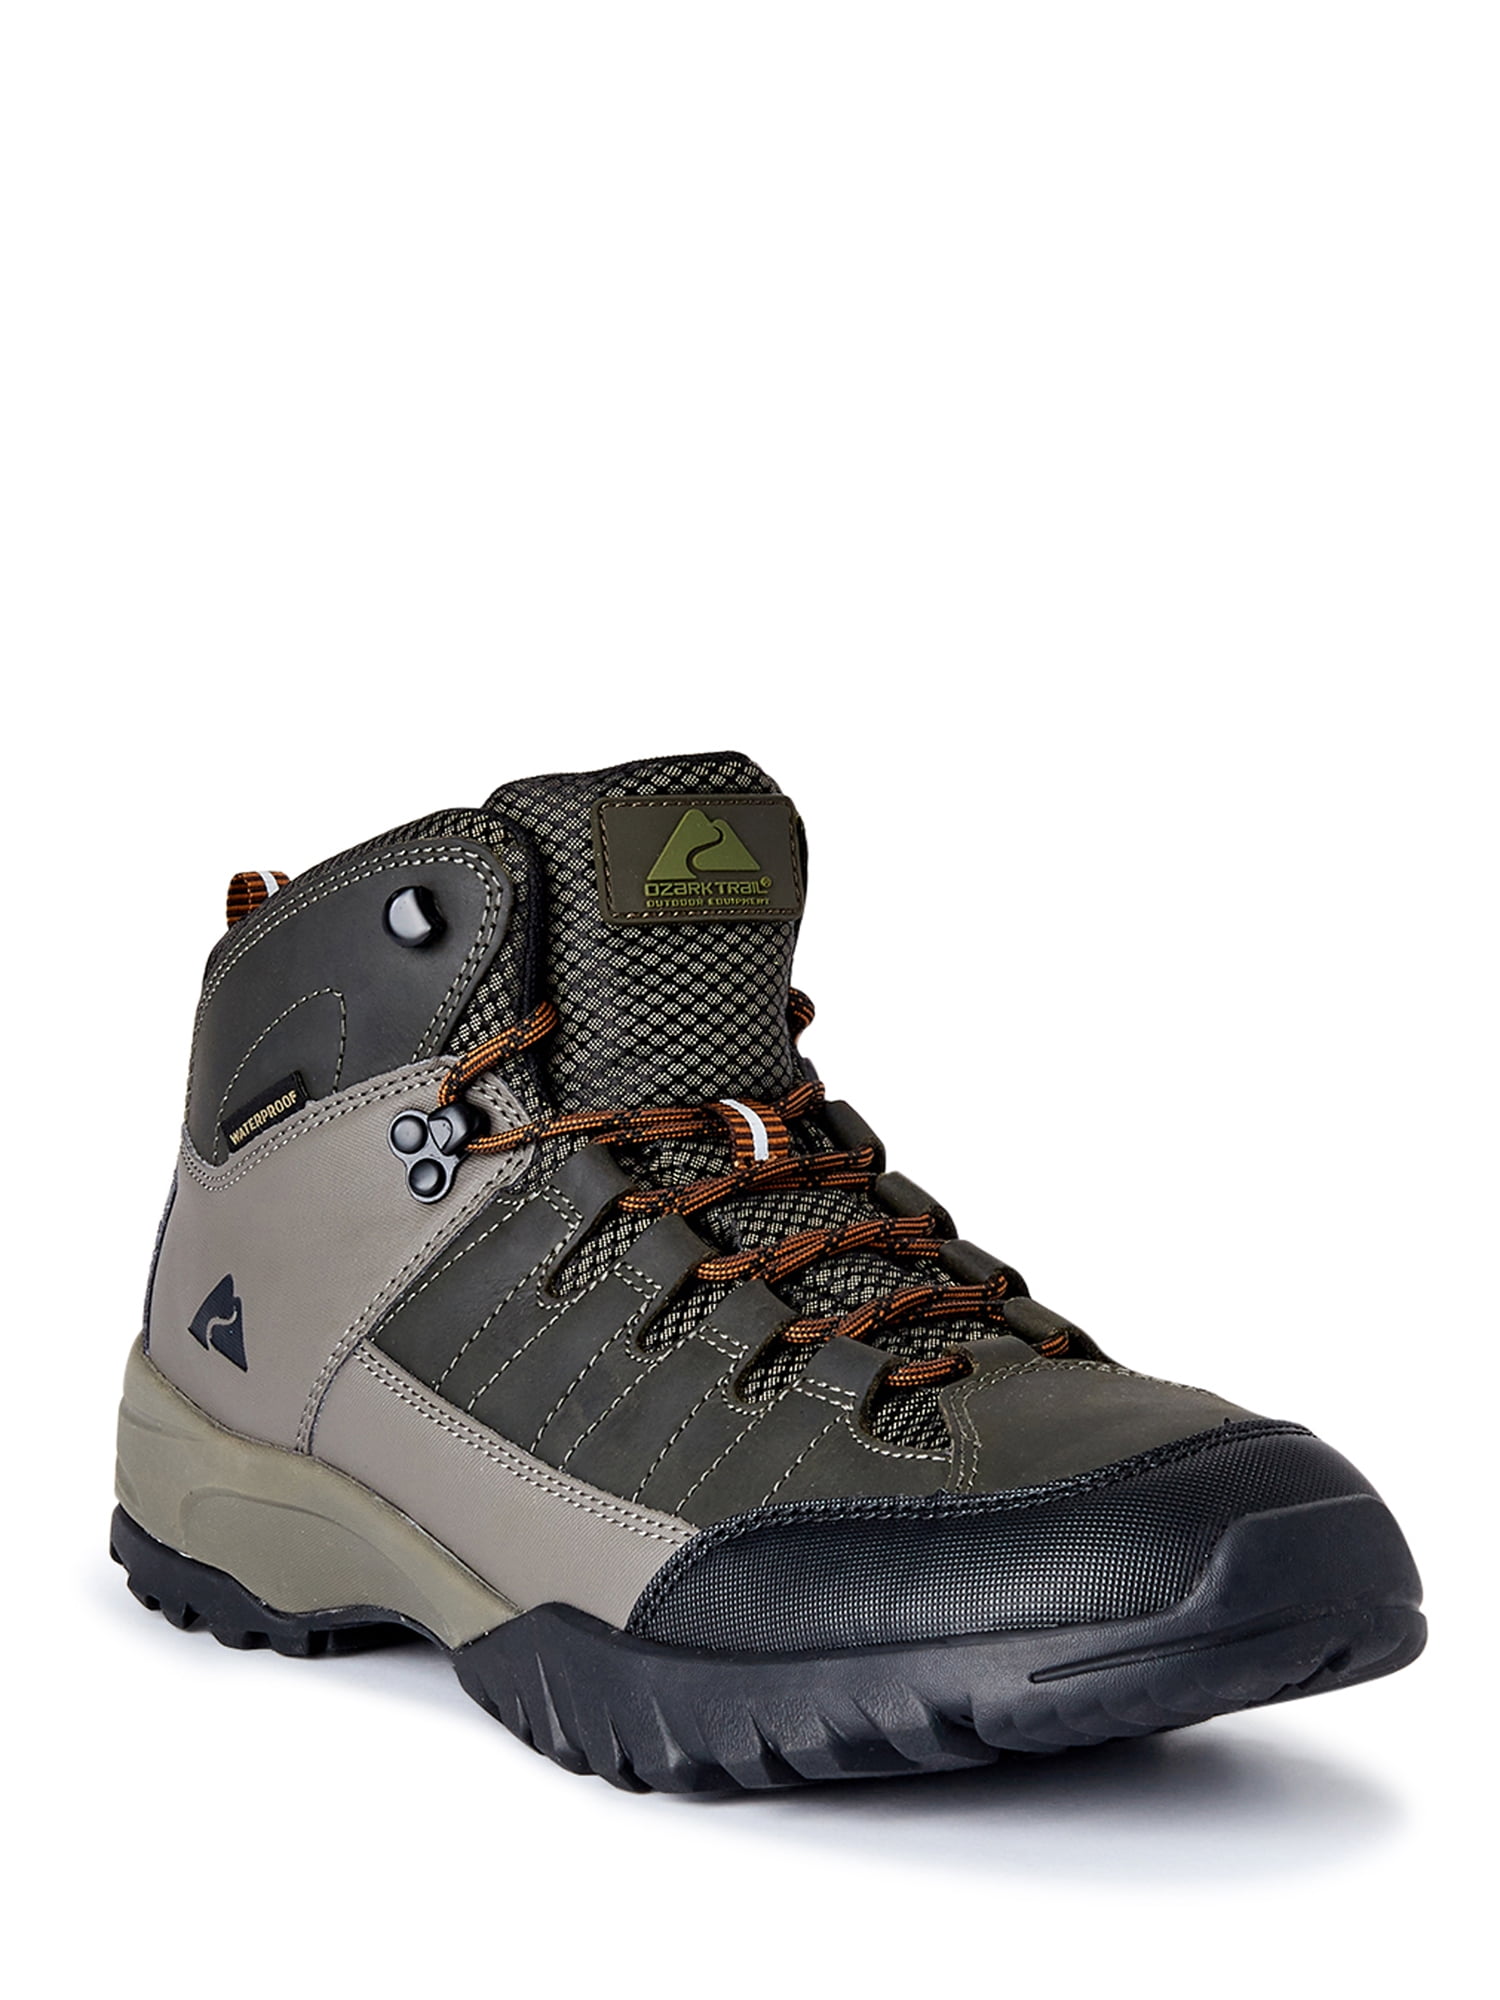 Western Chief Mens Hiker Hiking Boots